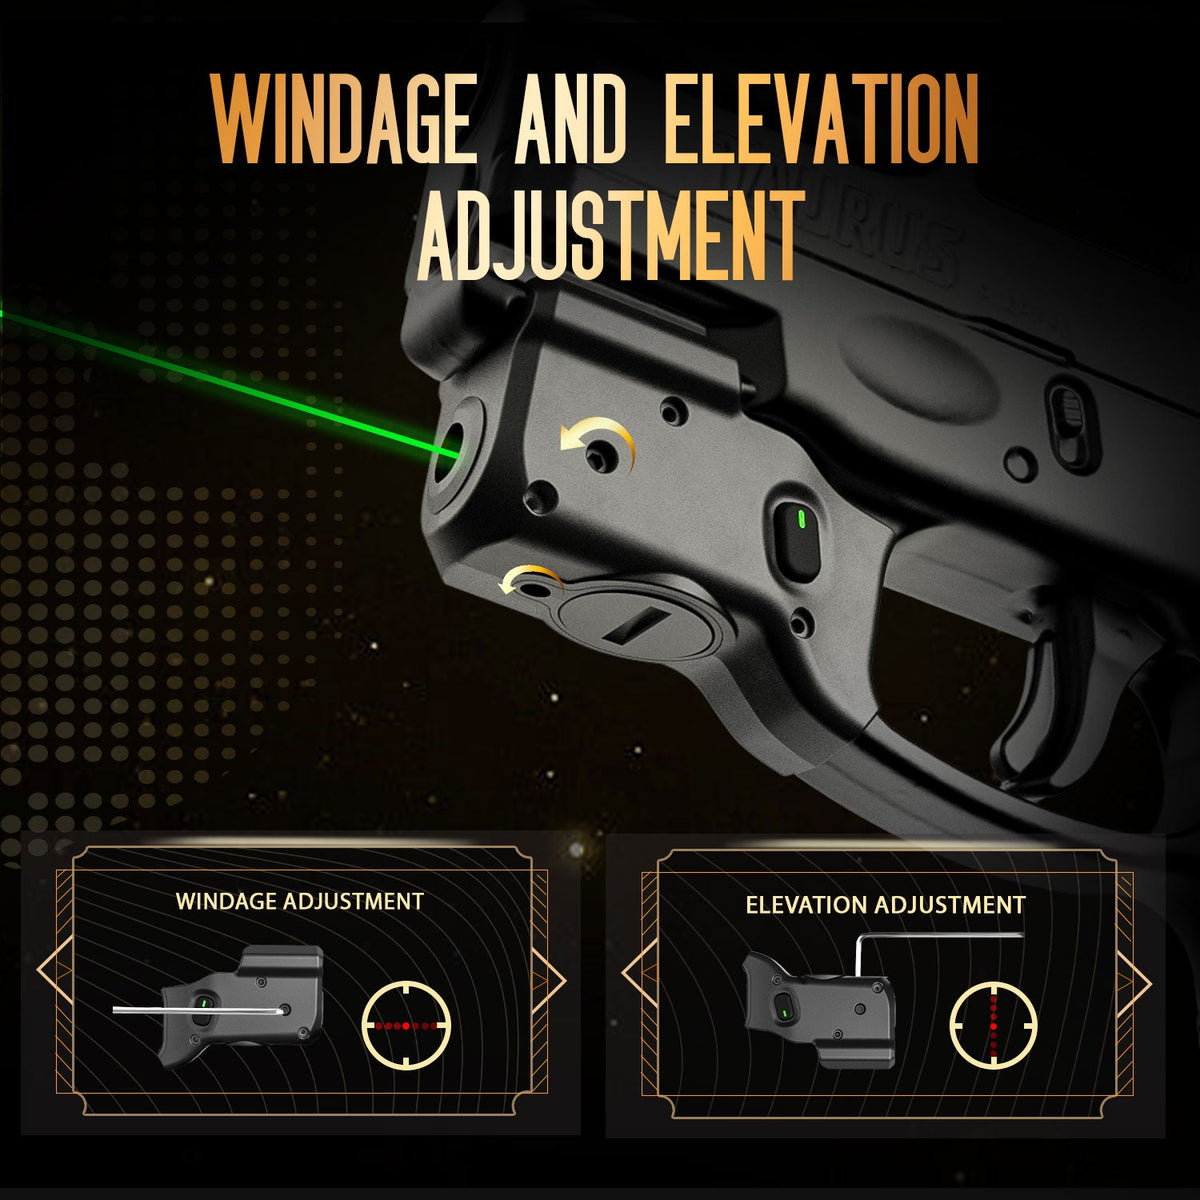 Green Laser Sight and Kydex Holster Combo Tailored Fit Taurus G2C/G3C/PT111 Millennium G2/PT140, Ultra Compact G2C Beam Sight, Gun Sight with Ambidextrous On/Off Switch & Power Indicator|WARRIORLAND